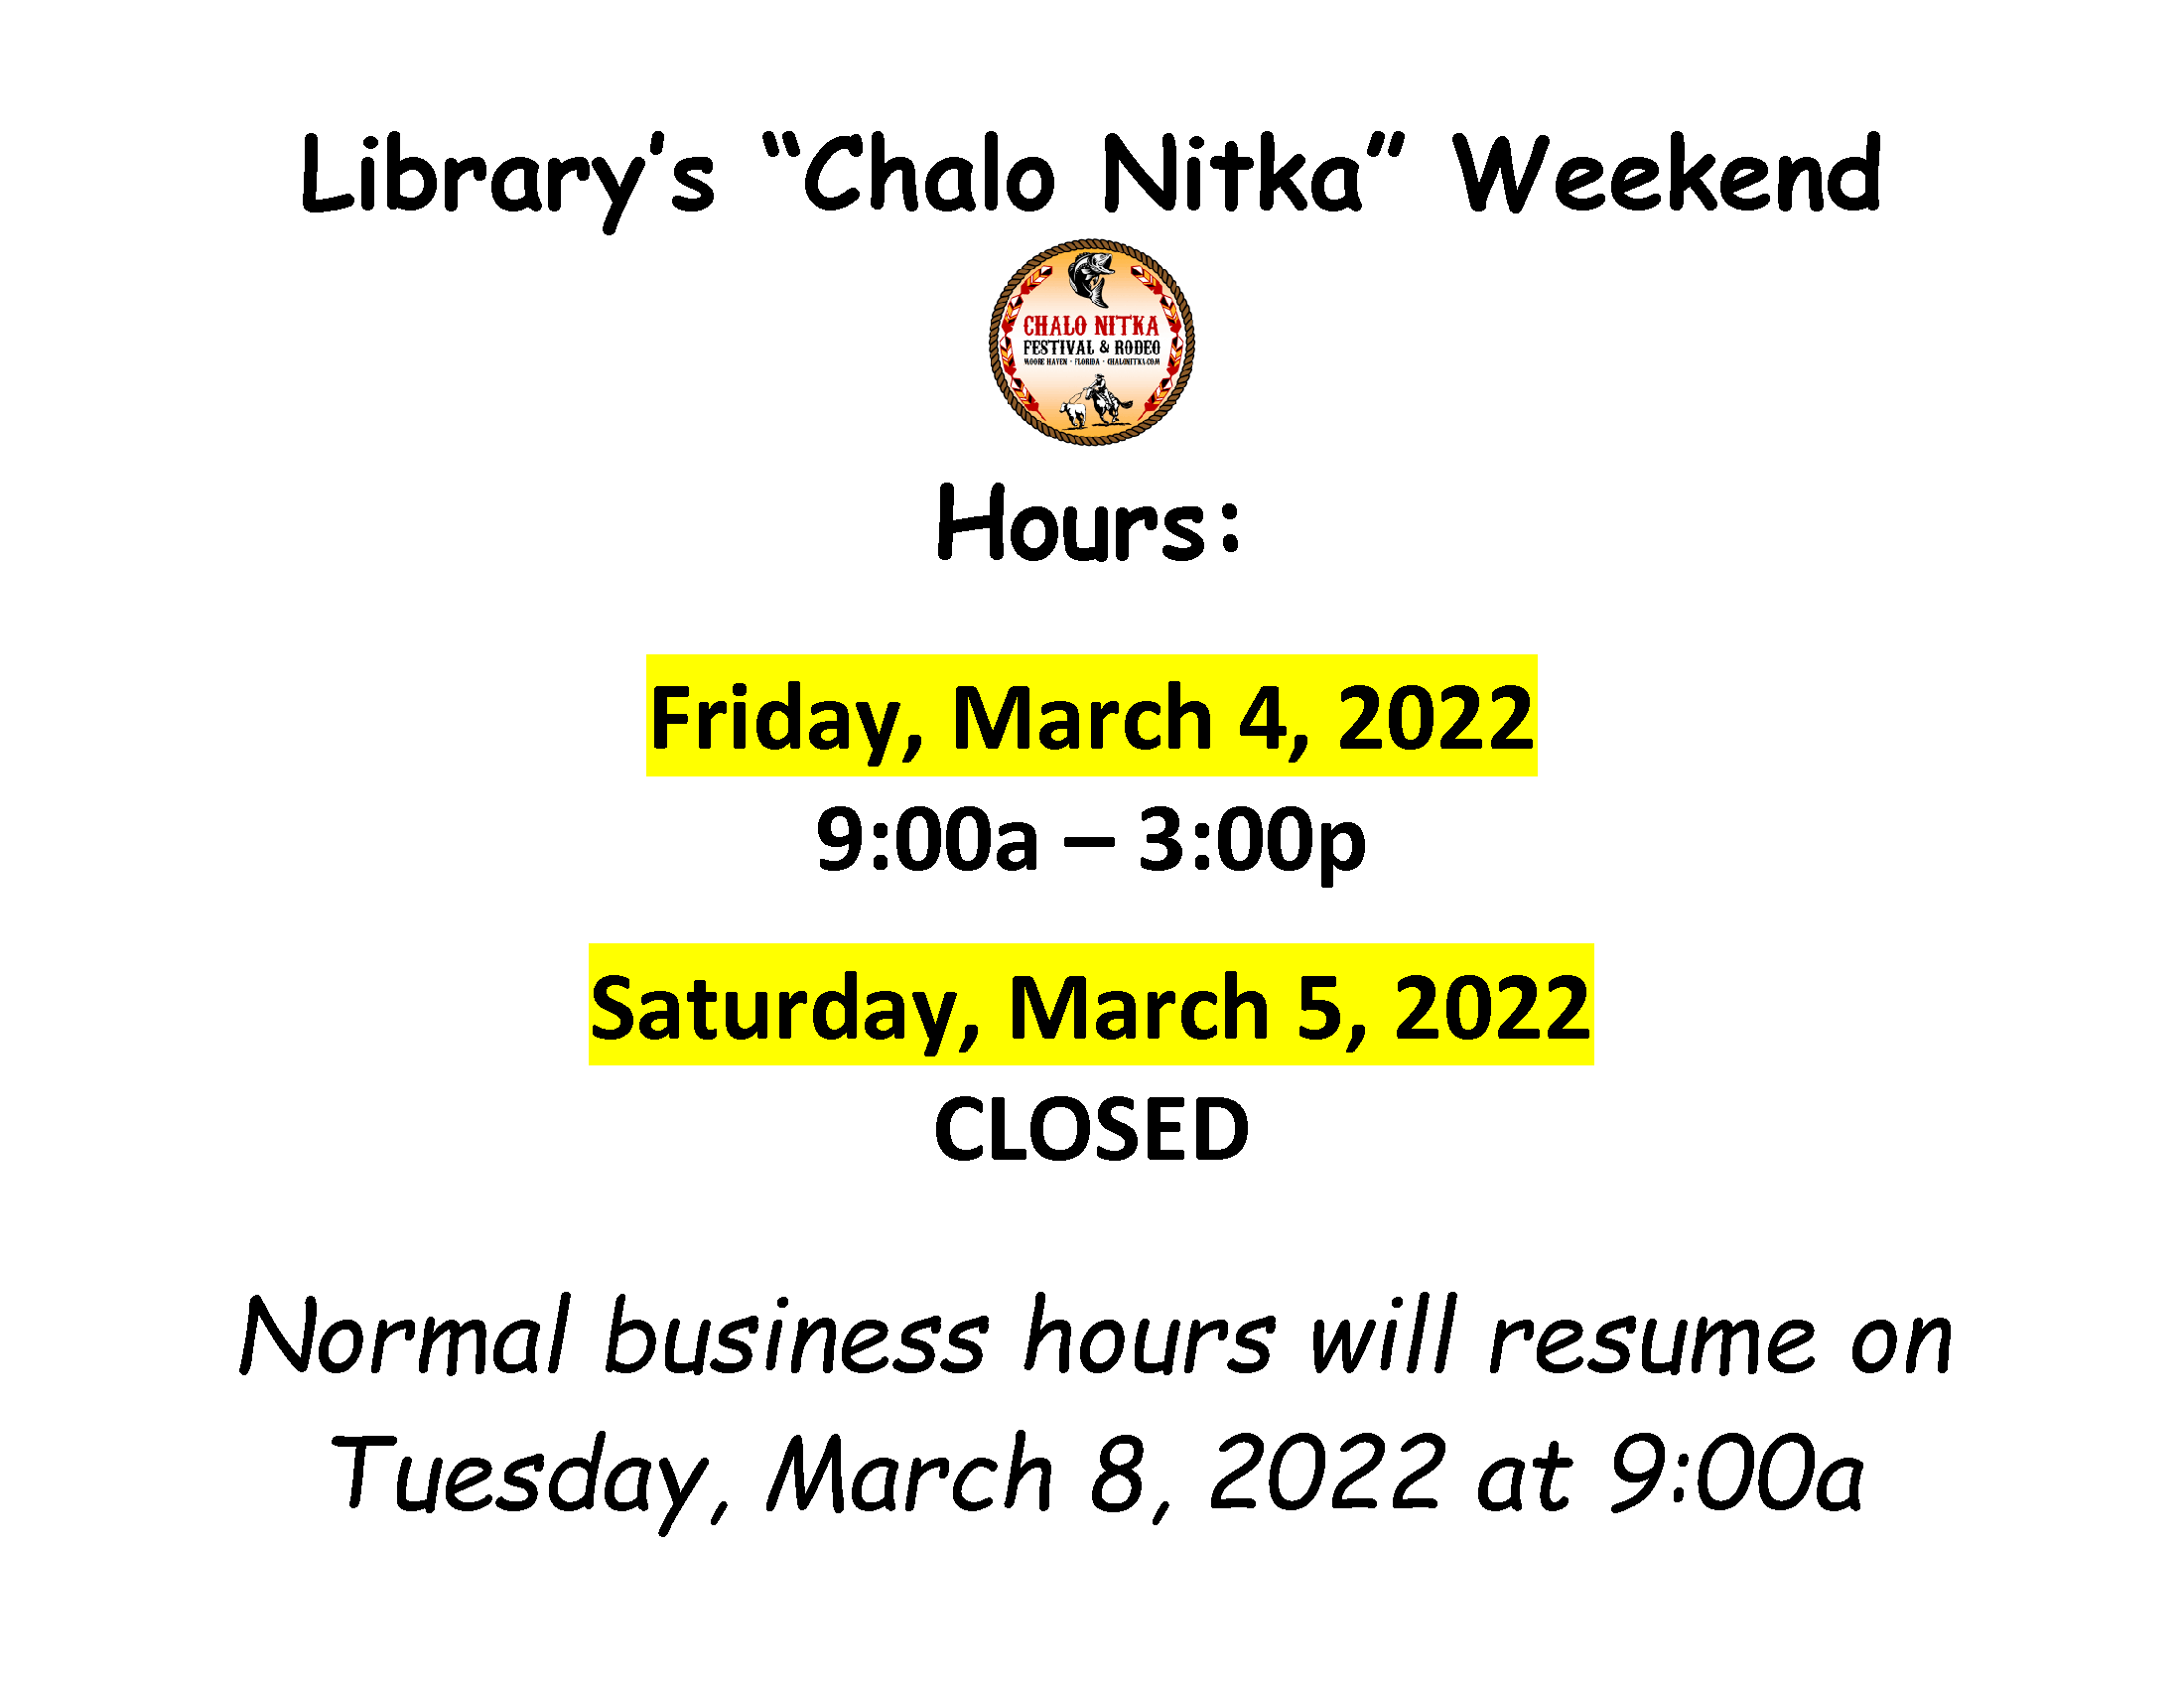 Library’s “Chalo Nitka” Weekend   Hours:  Friday, March 4, 2022 9:00a – 3:00p  Saturday, March 5, 2022 CLOSED  Normal business hours will resume on Tuesday, March 8, 2022 at 9:00a